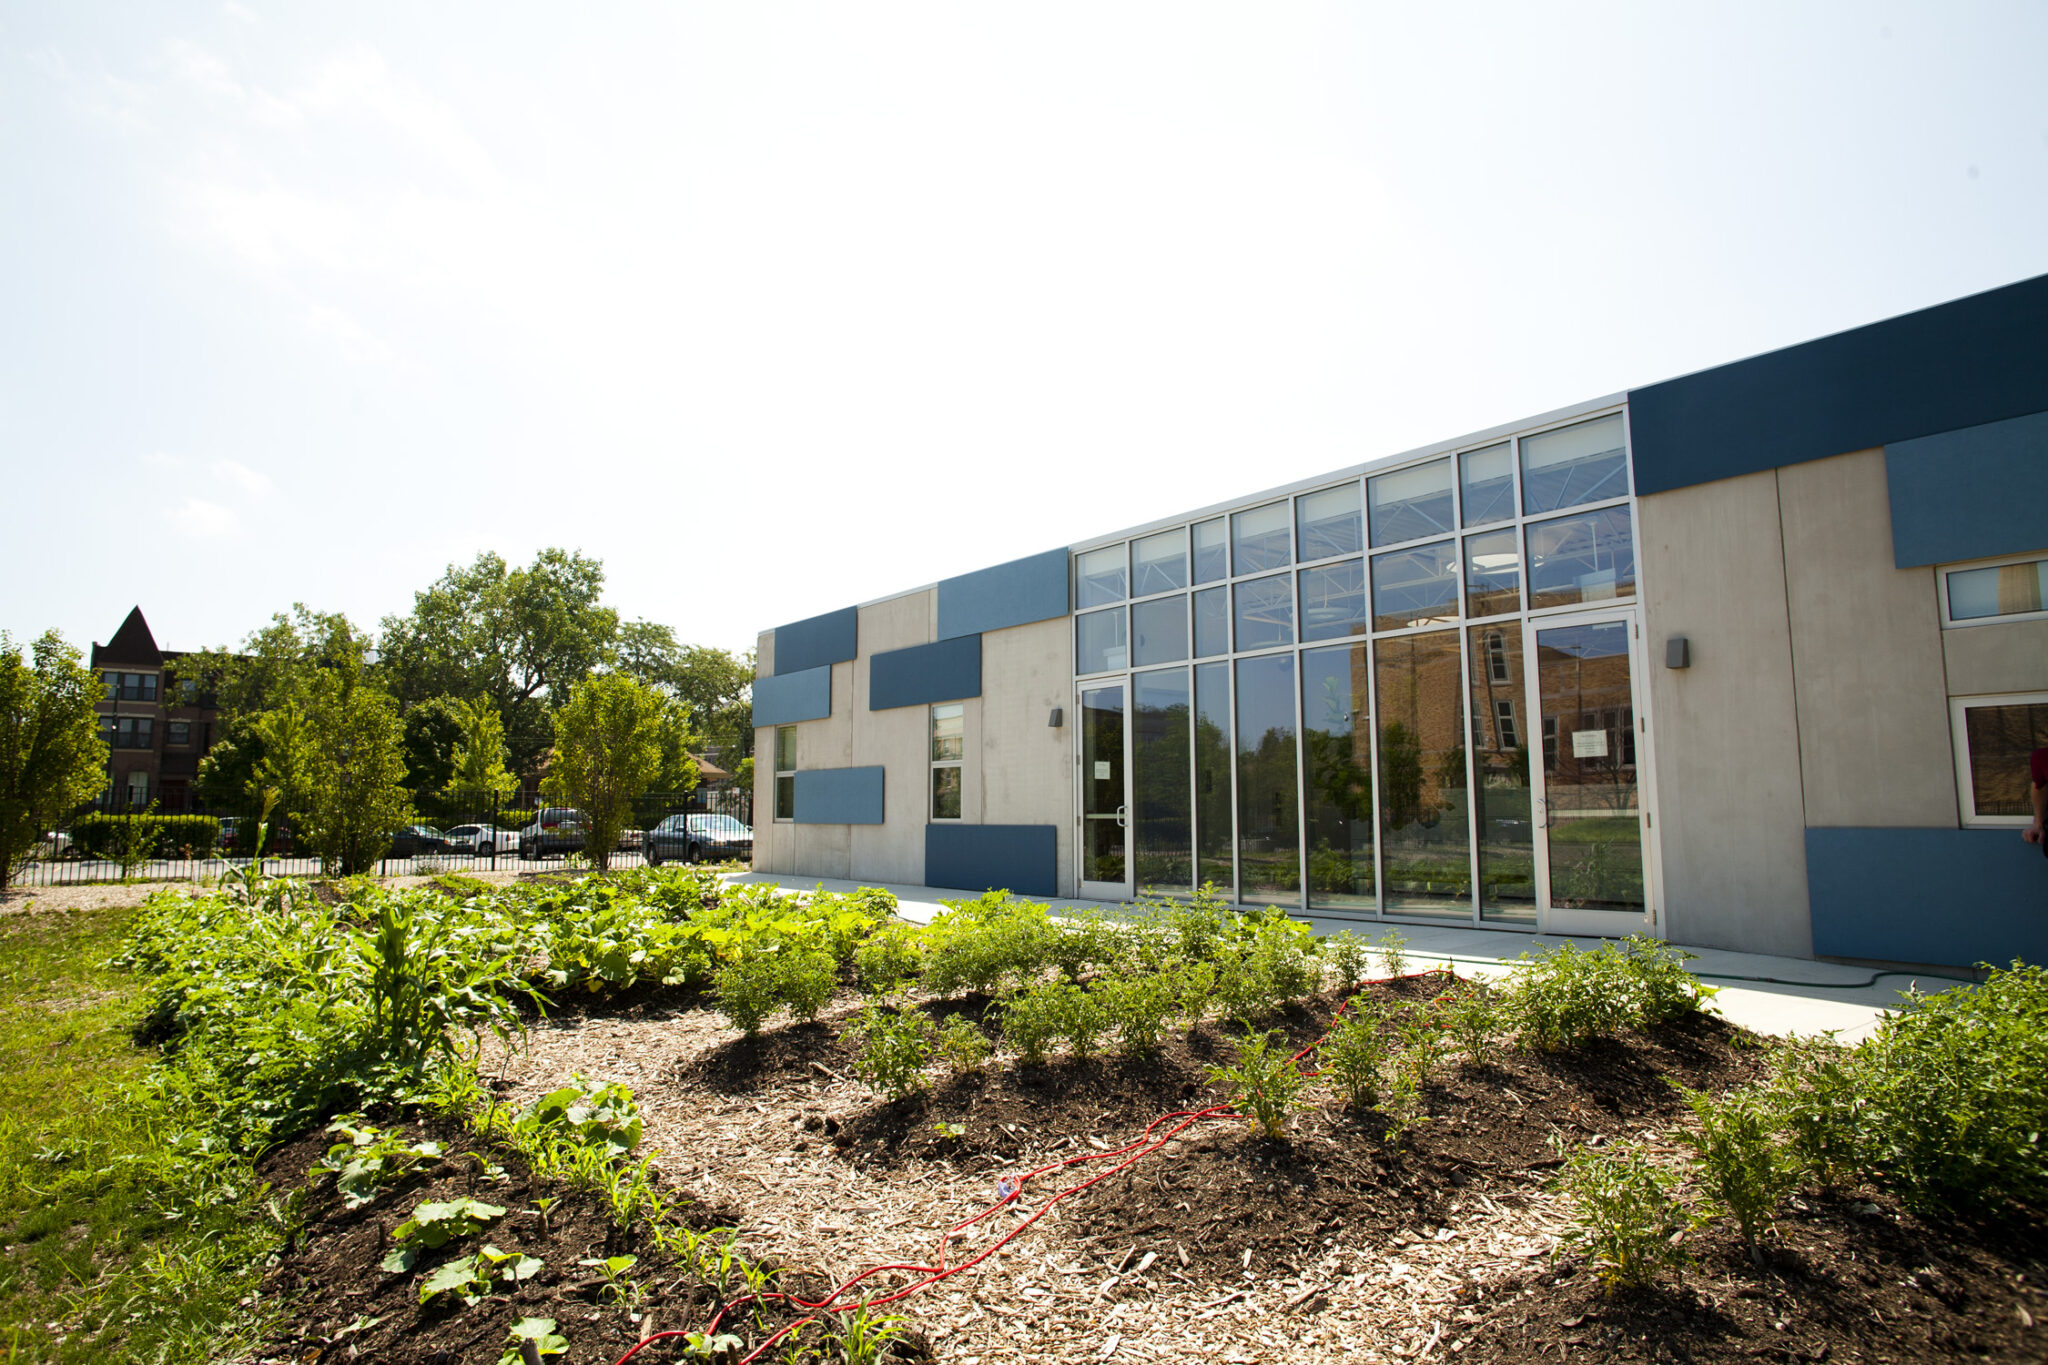 exterior photo of building with student garden in front